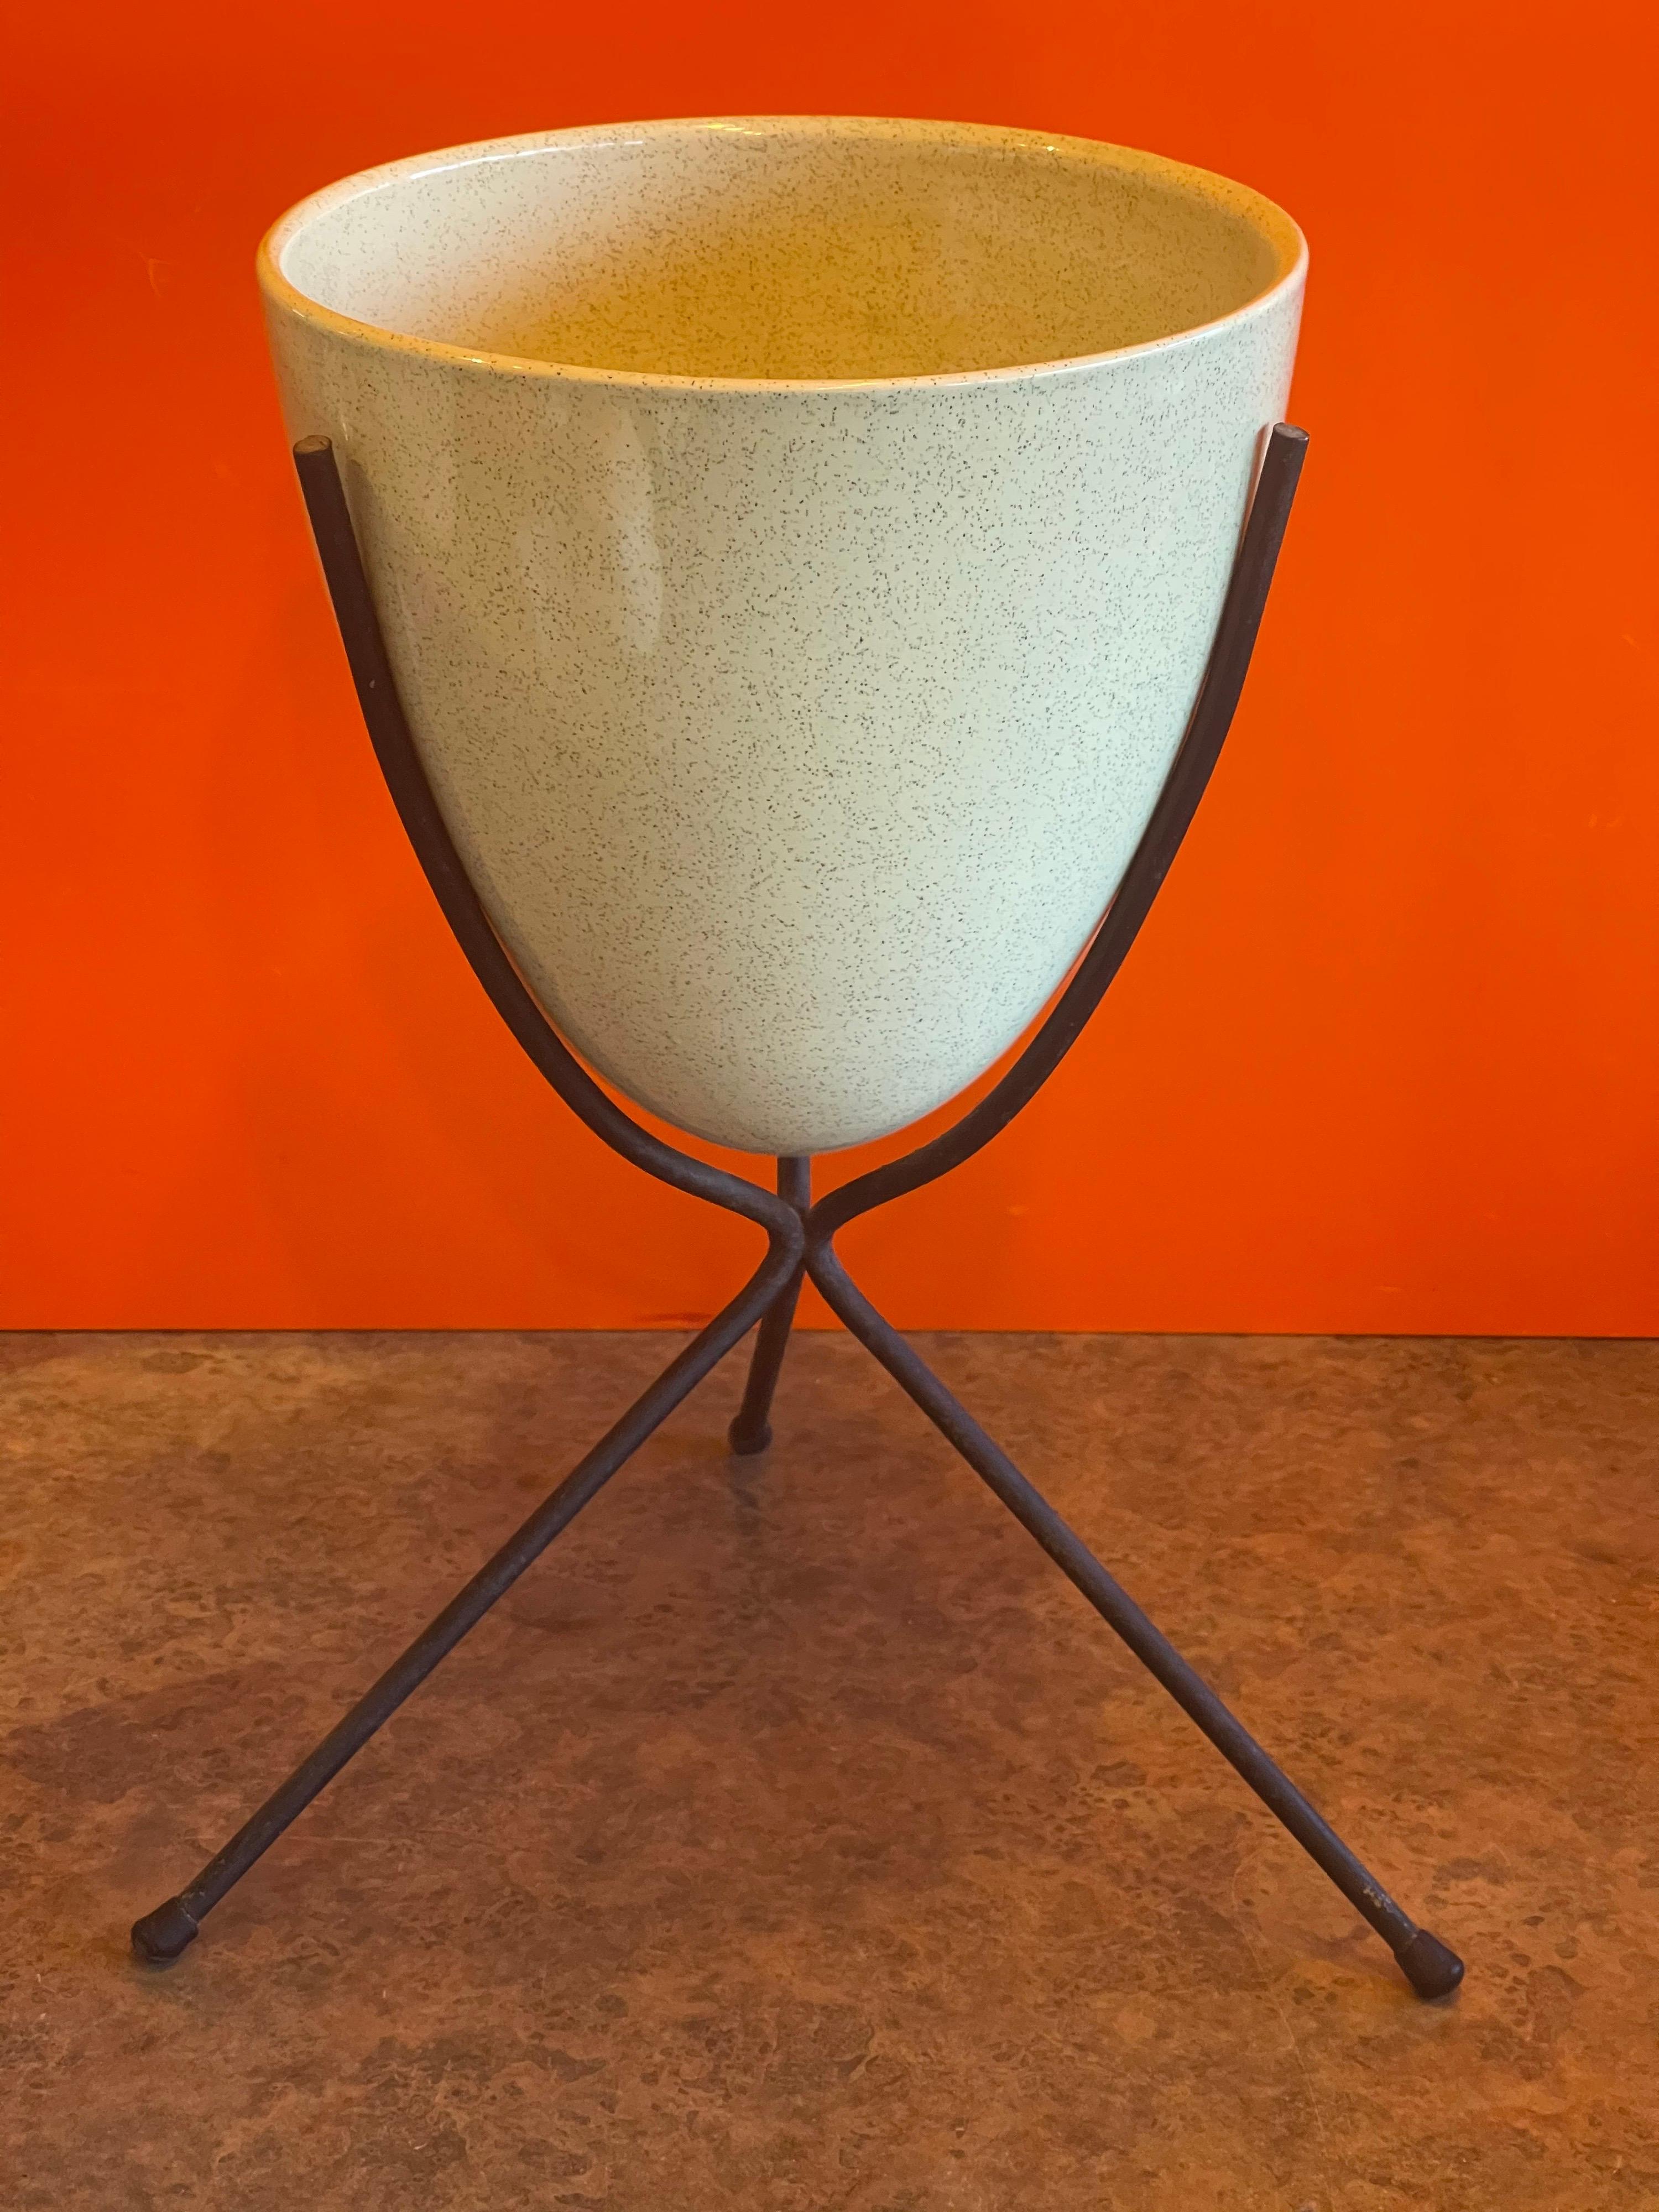 Pottery Rare Pair of Atomic Age Ceramic Bullet Planters on the Metal Stands by Bauer For Sale